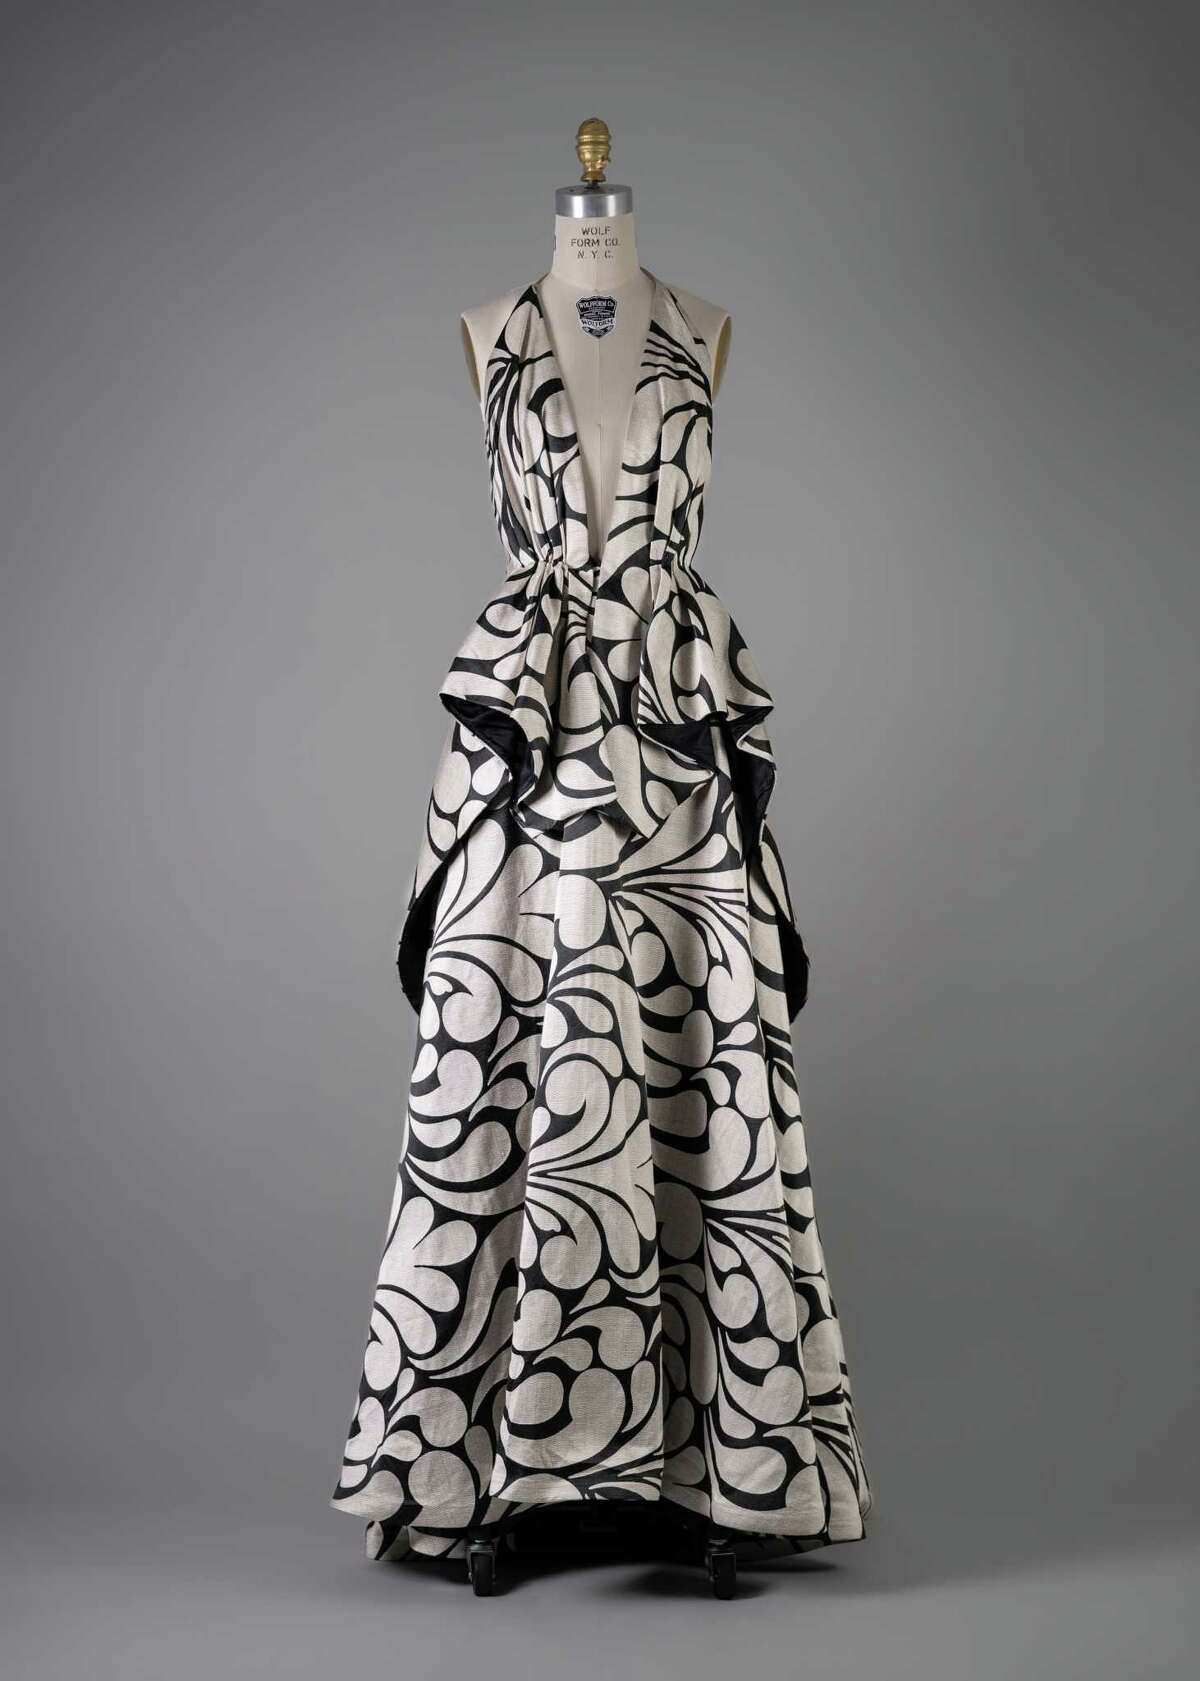 This dress by Houston native designer Cesar Galindo (2010) is part the Houston Community College's digital Fashion Archive, a collection of historic fashion, accessories and textiles from the 1740s to present.